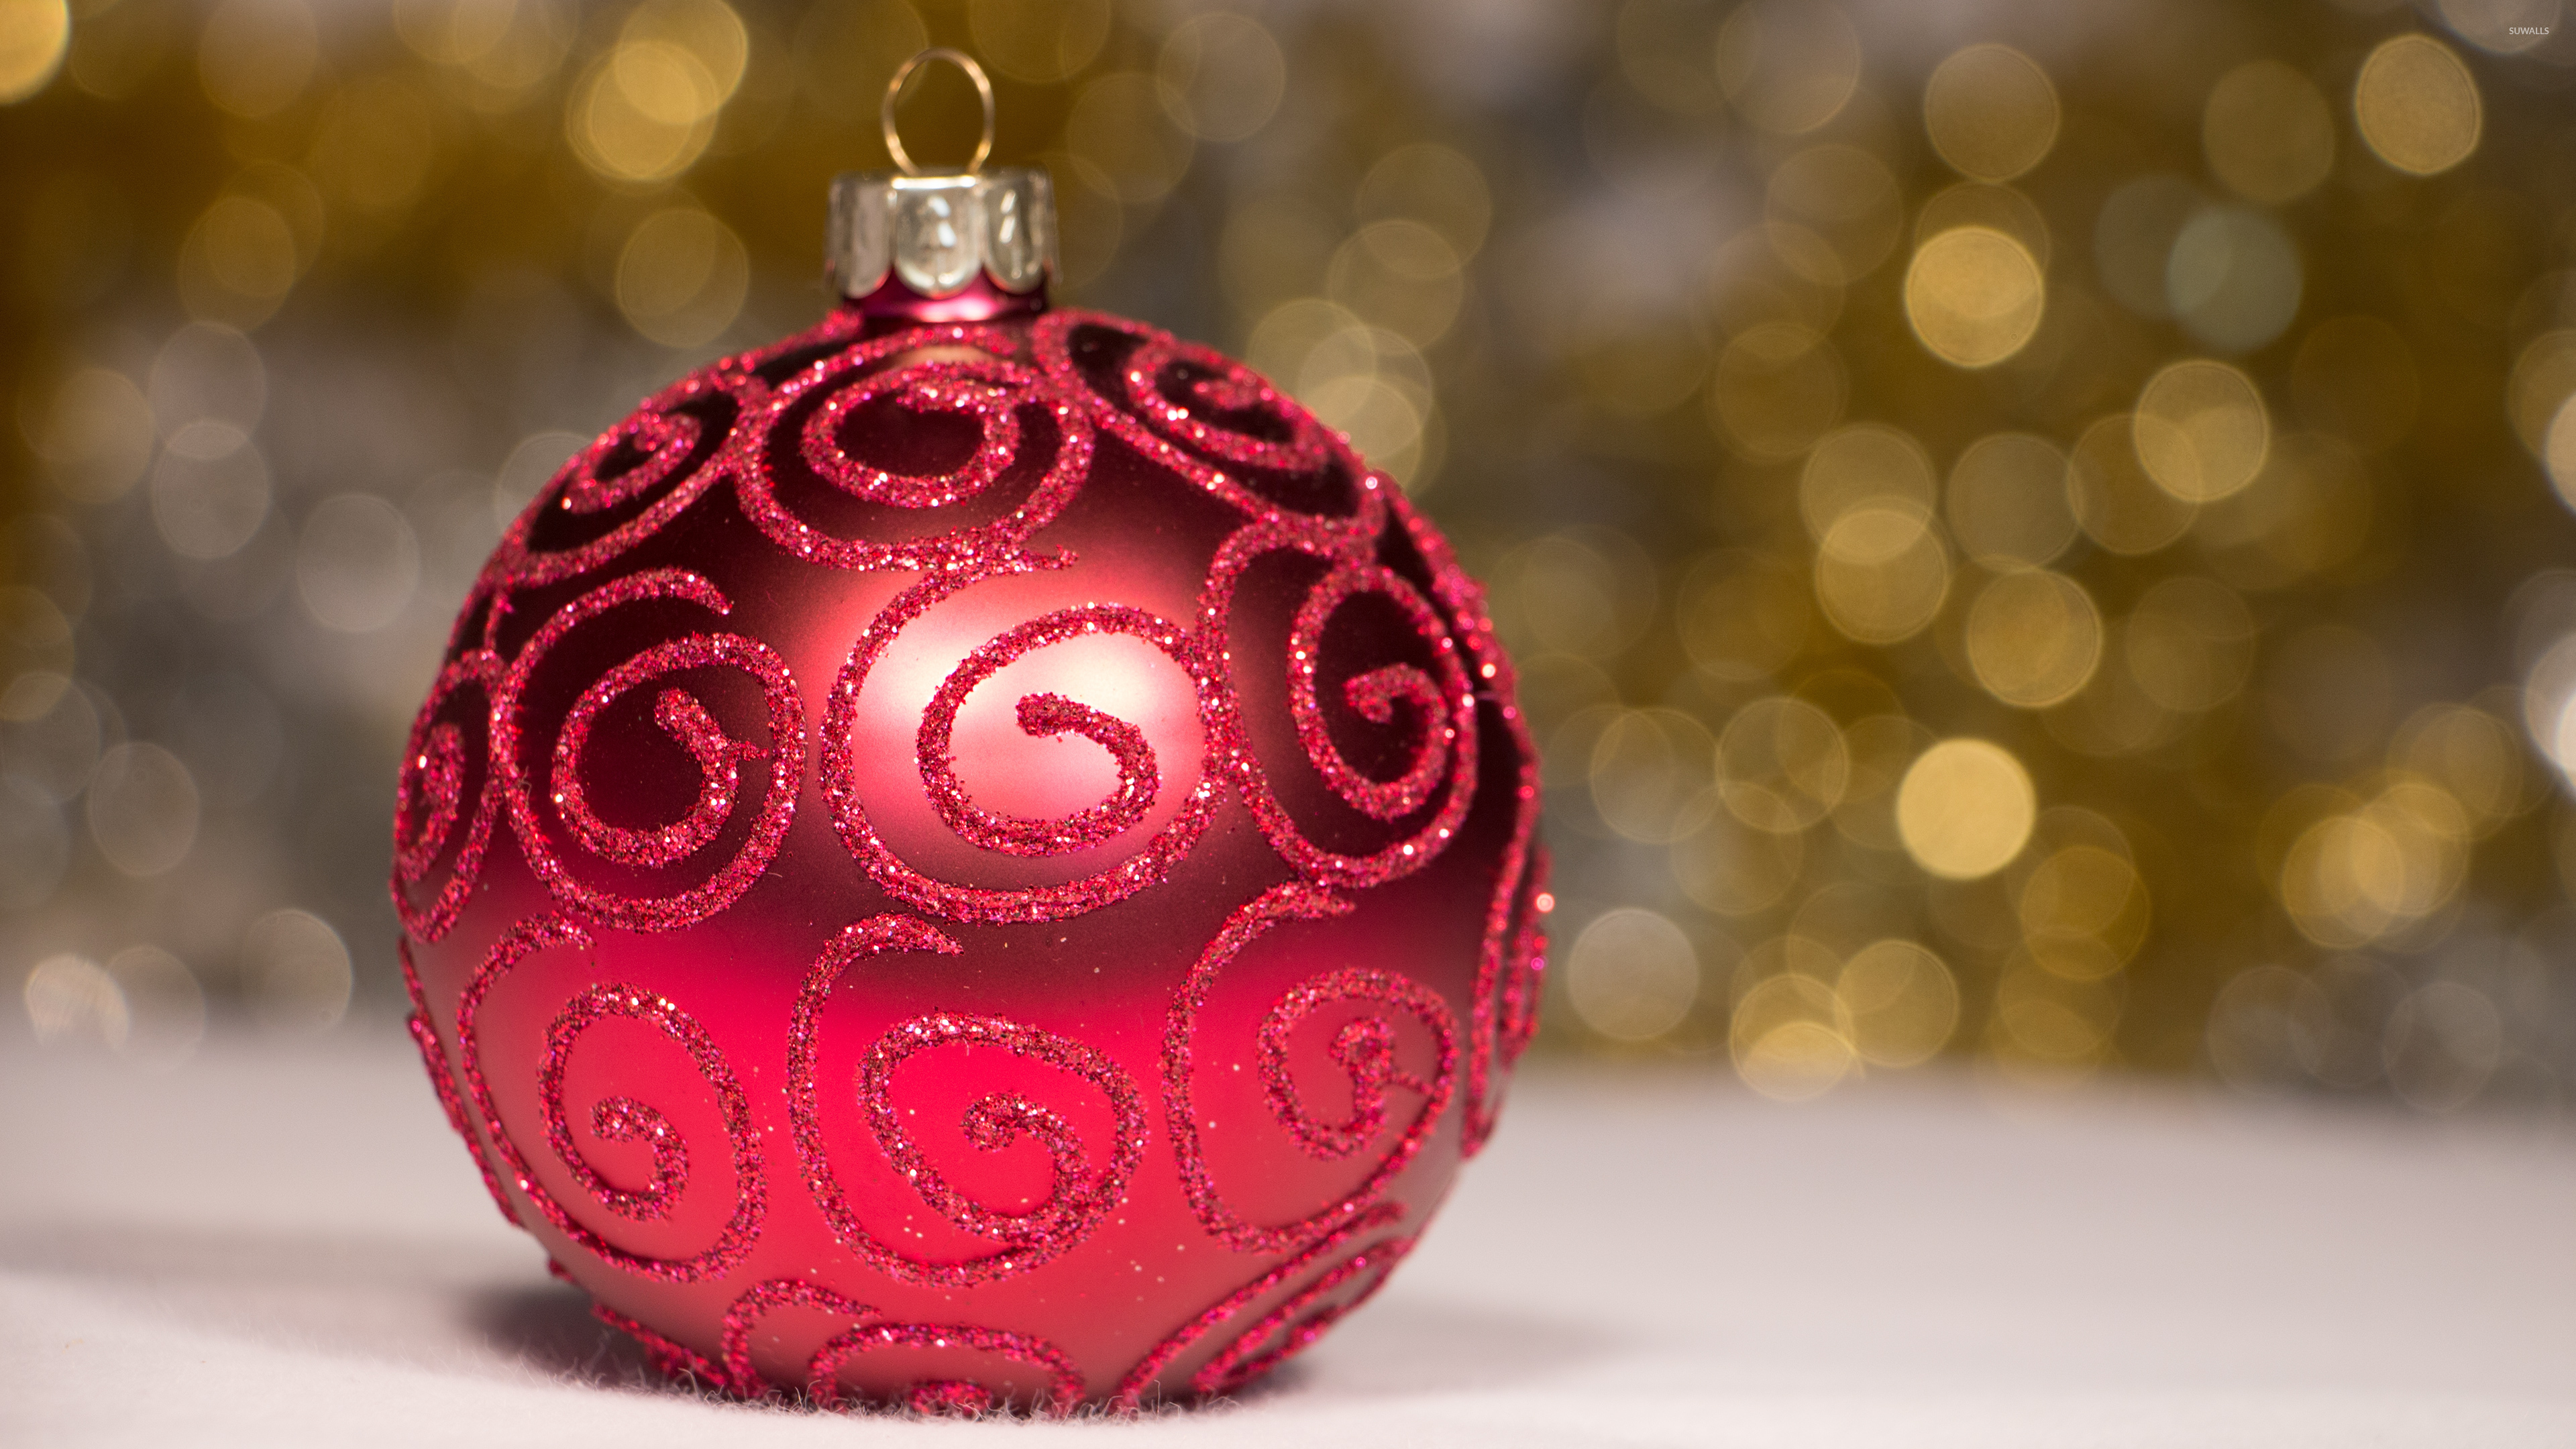 Elegant Christmas bauble wallpaper - Holiday wallpapers - #51173